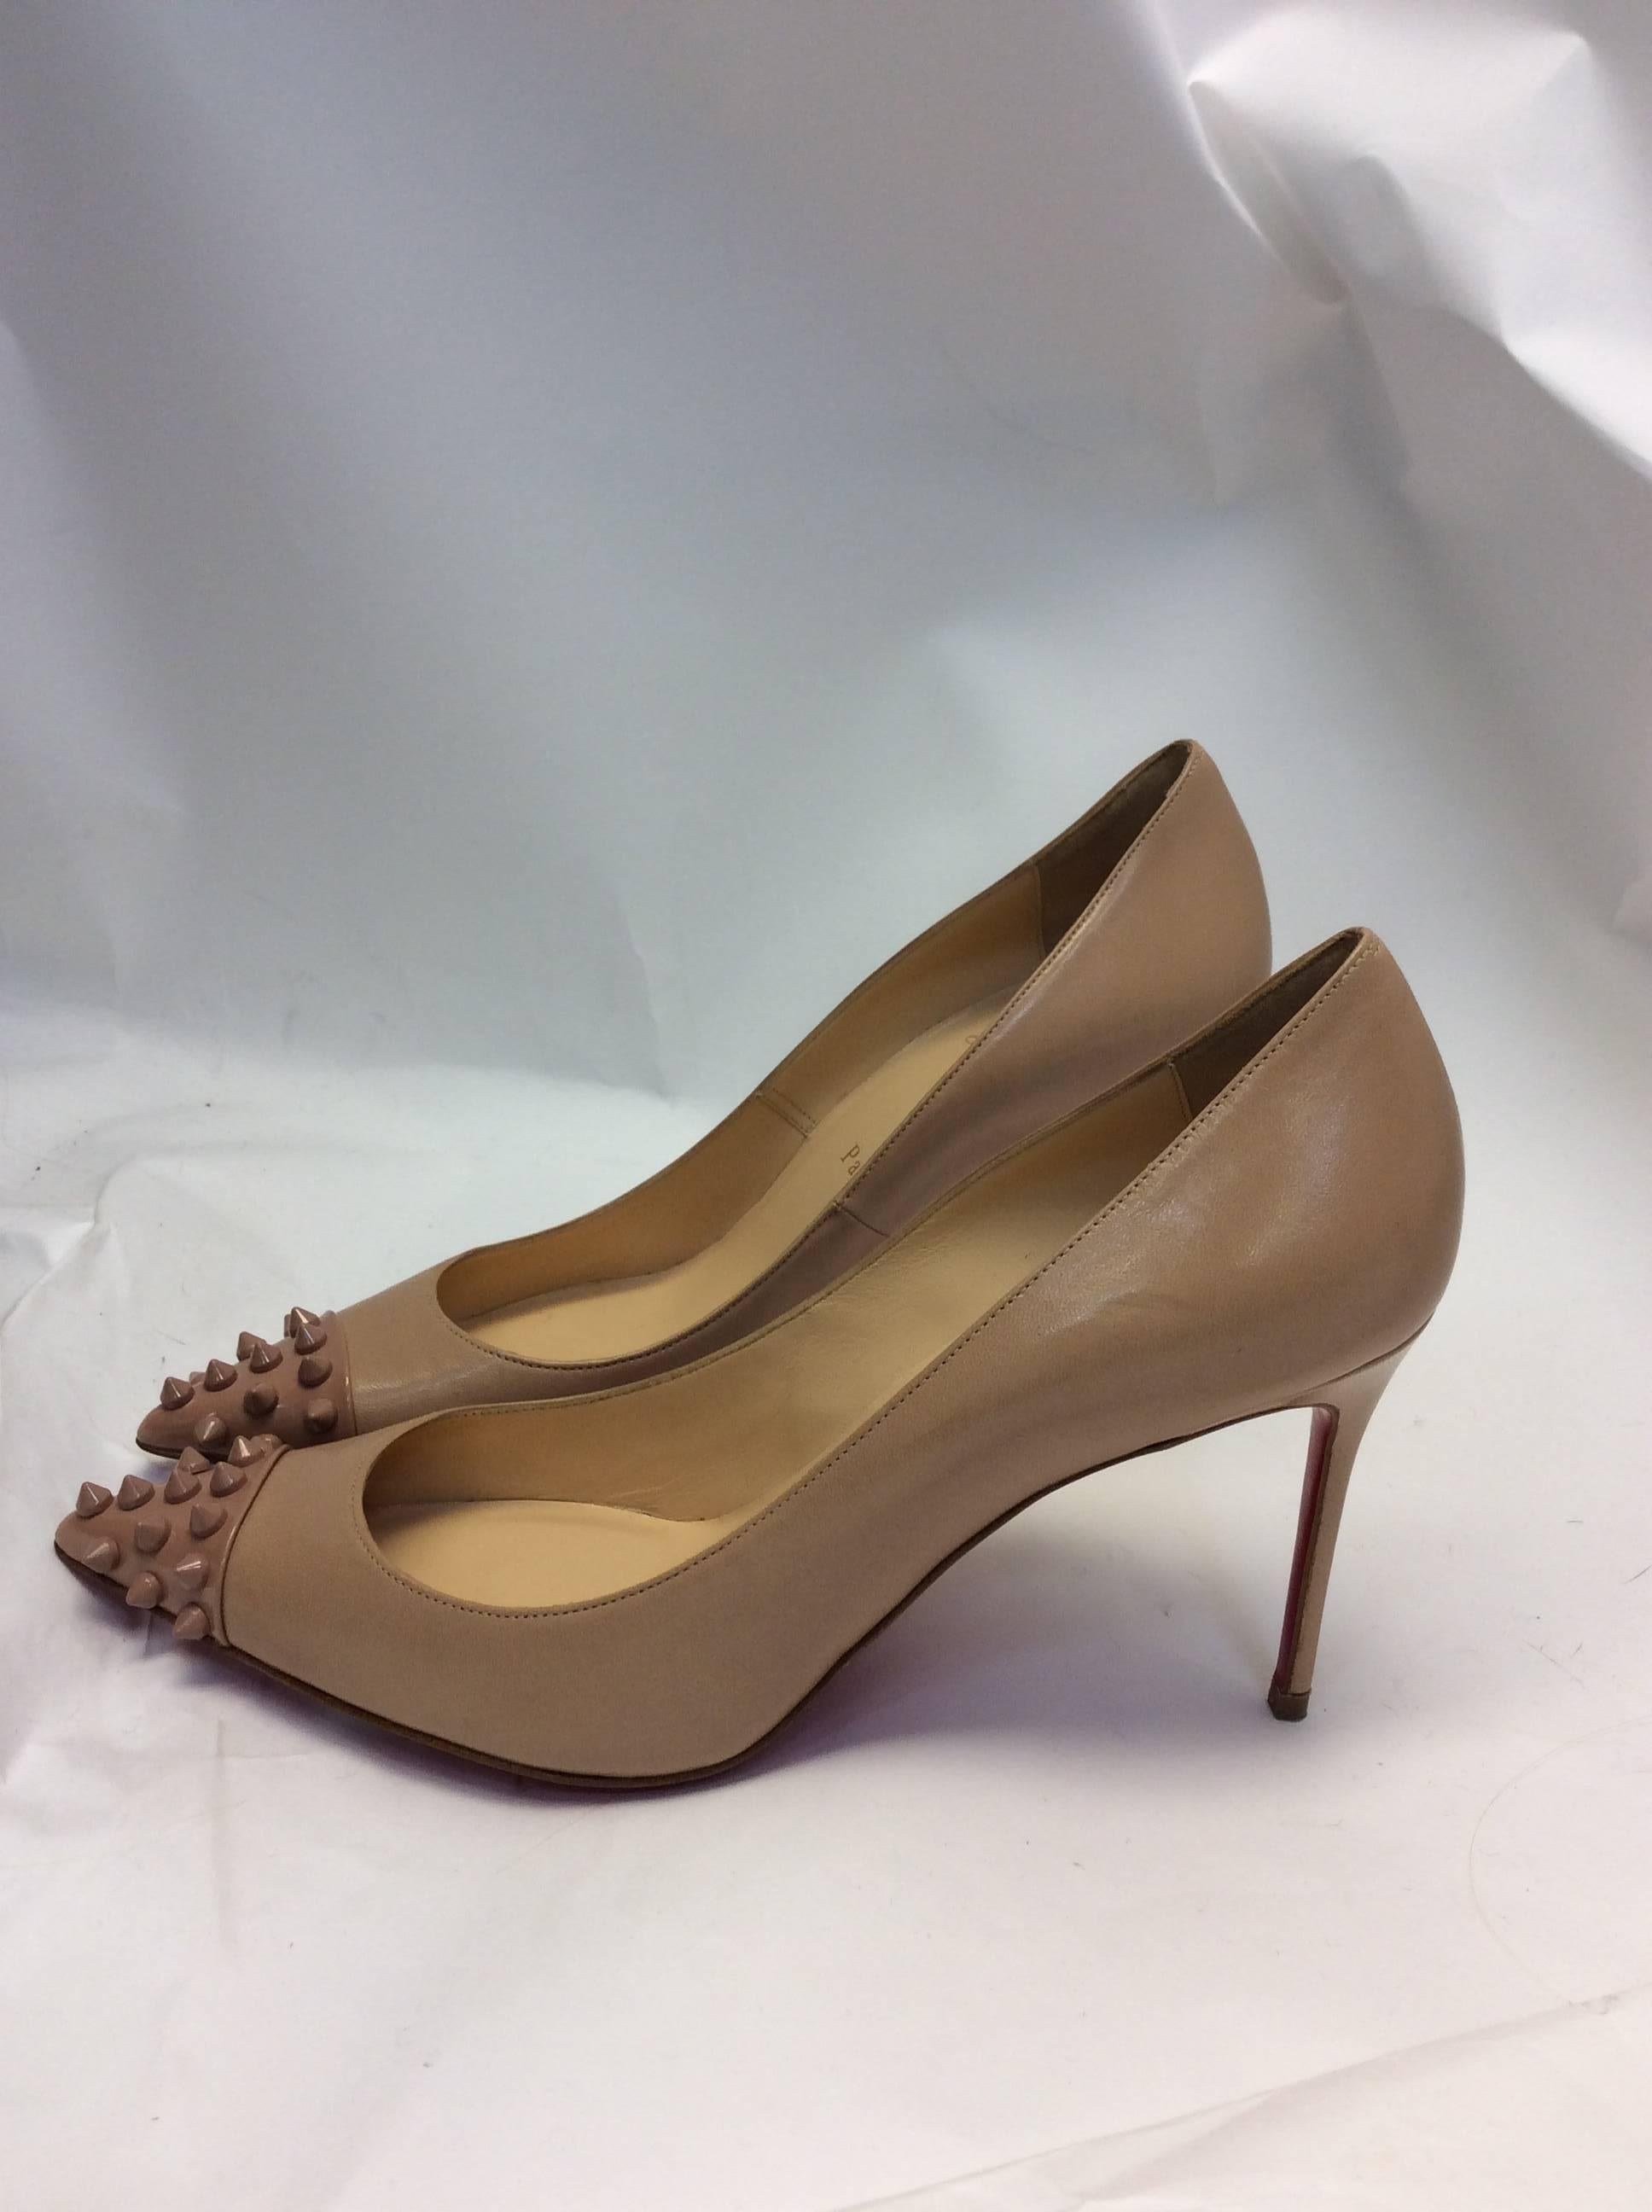 Brown Christian Louboutin New Nude Studded Stiletto For Sale